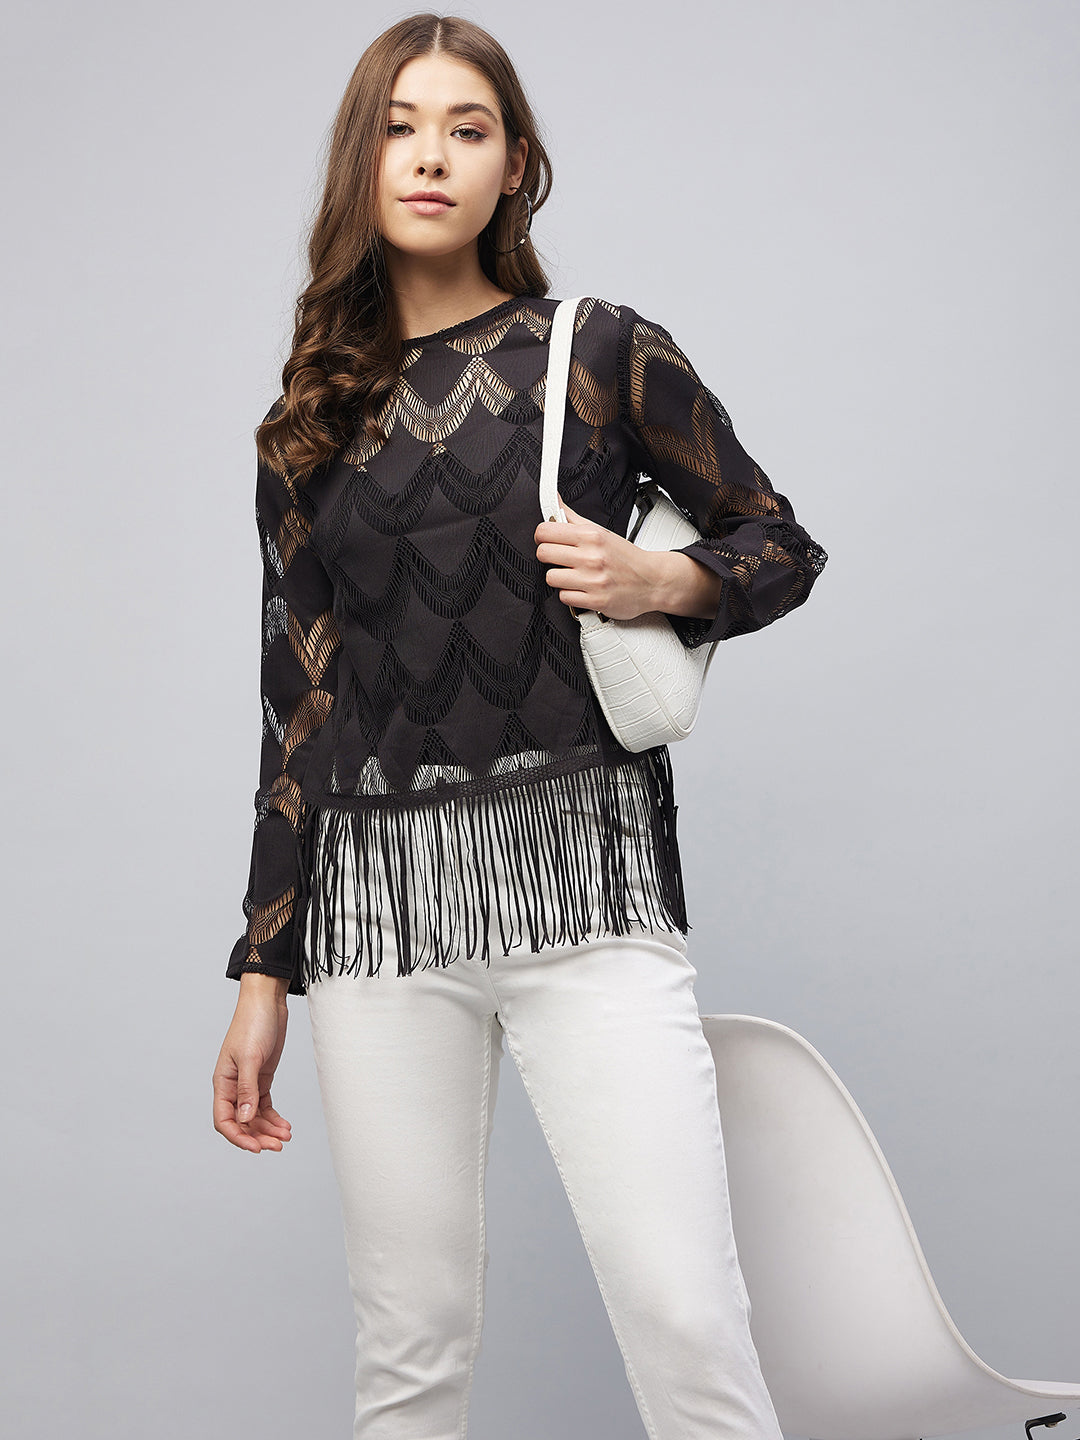 Women's Black Sheer Lace Top with Fringes (Inner not provided)